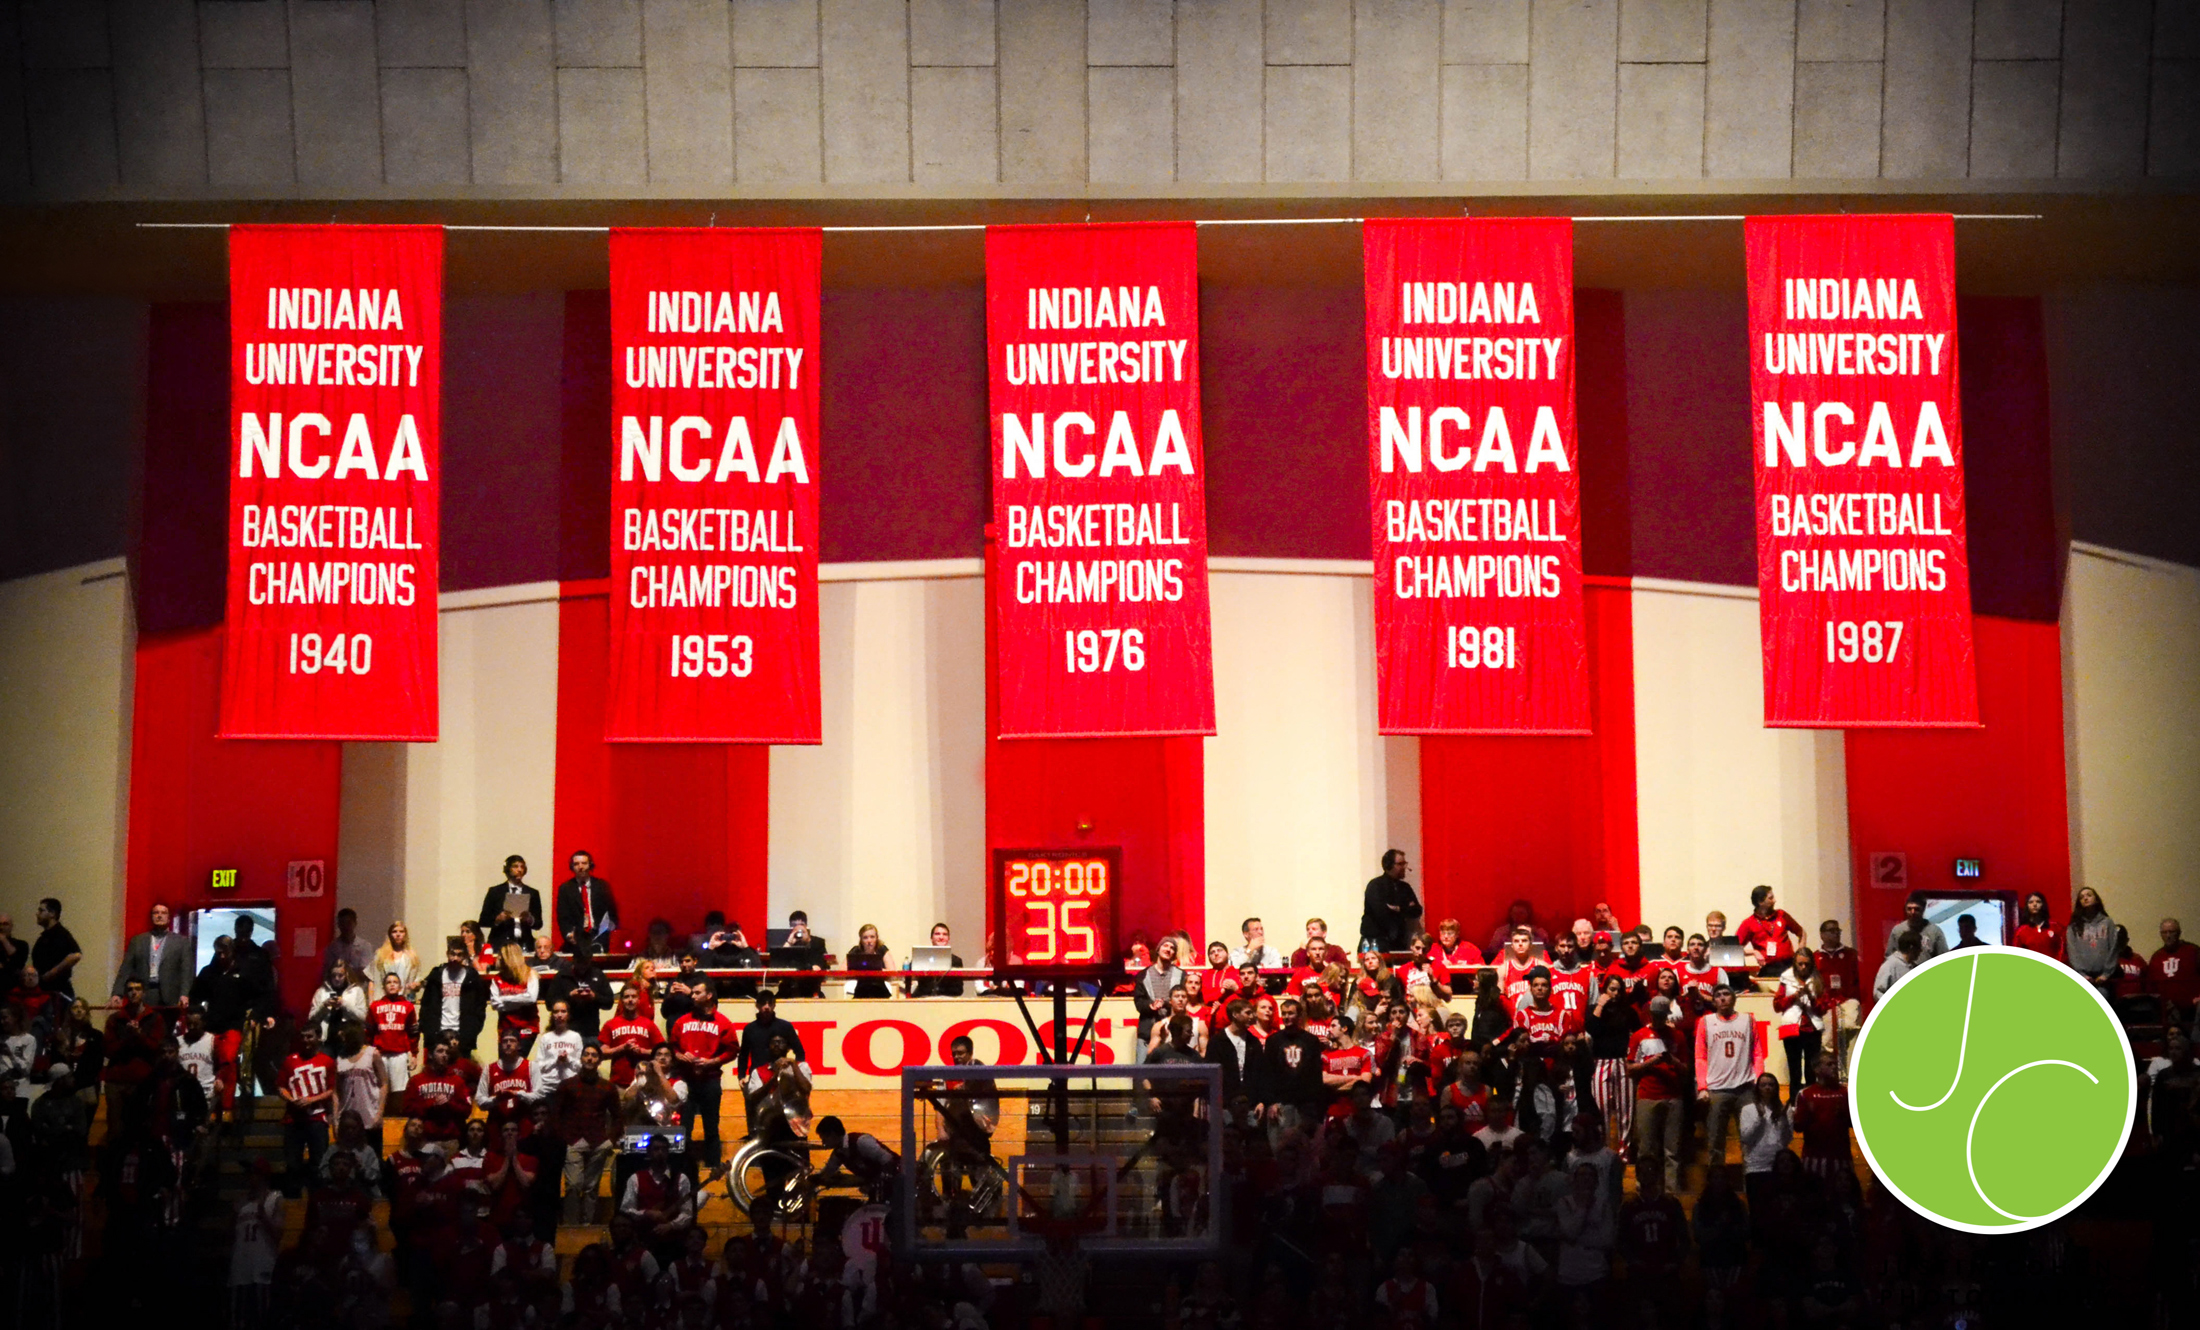 Indiana Hoosiers Basketball National Champions Banners at Assembly Hall in Bloomington, Indiana